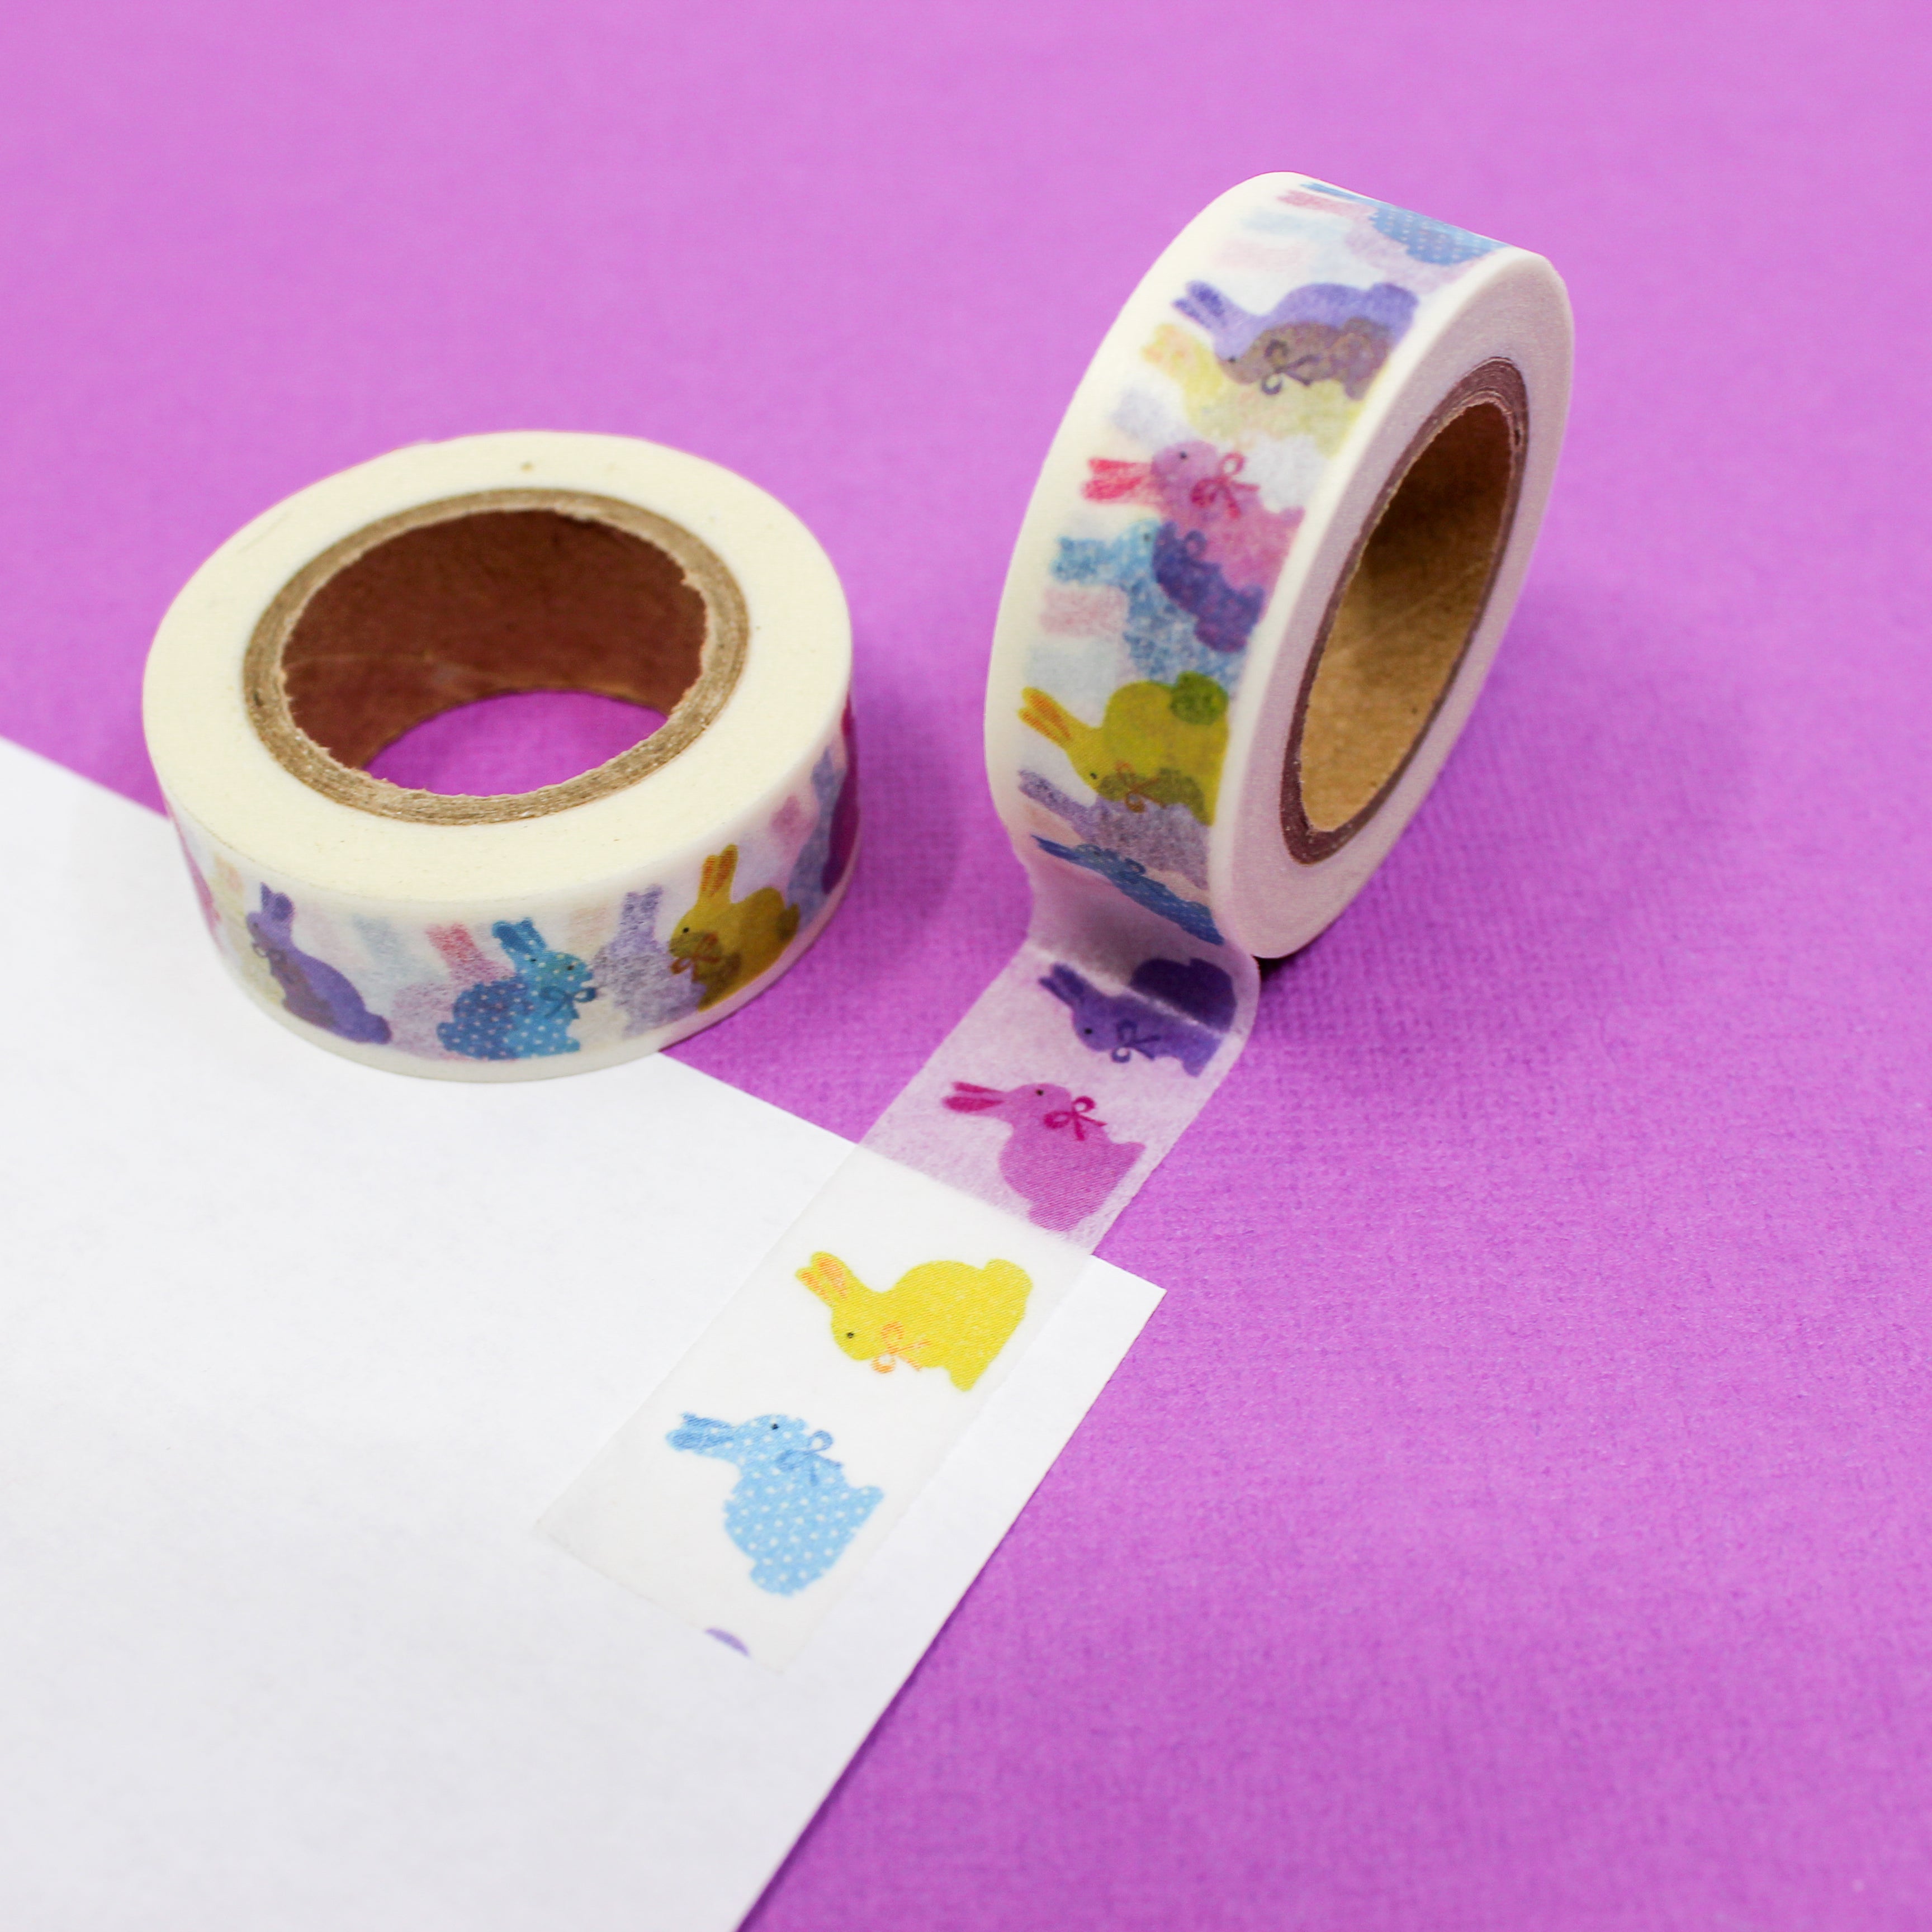 This is colorful bonny themed washi tape from BBB Supplies Craft Shop